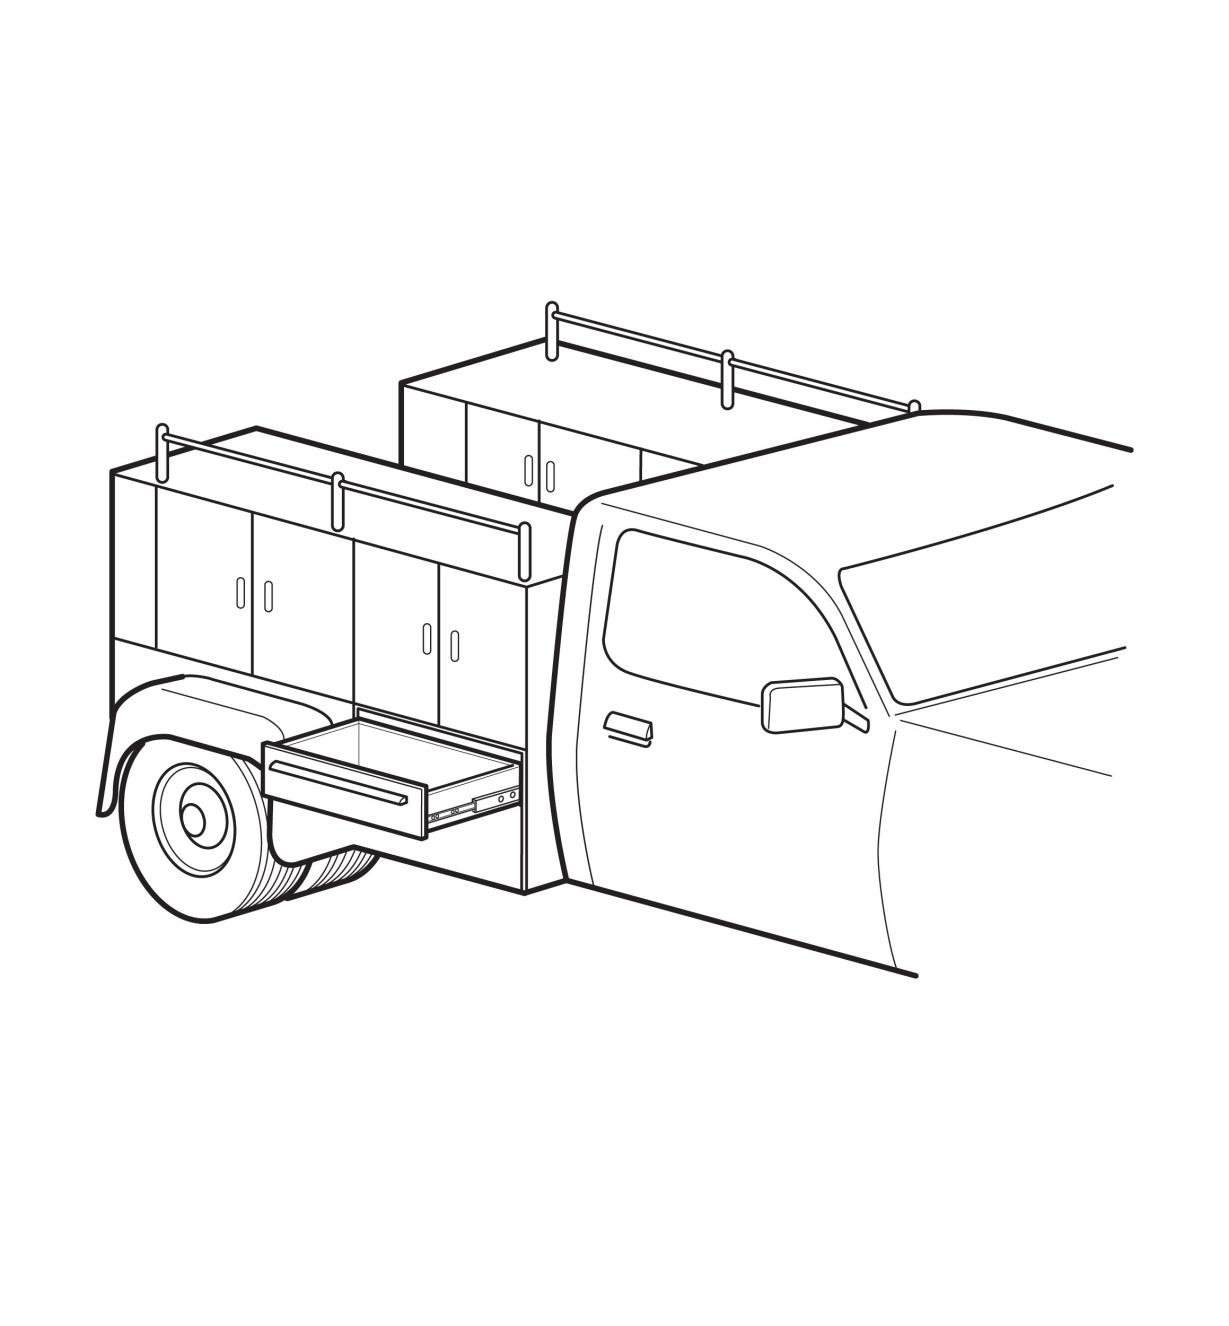 Illustration of Extra-Heavy-Duty Slides used in a drawer in the side of a truck